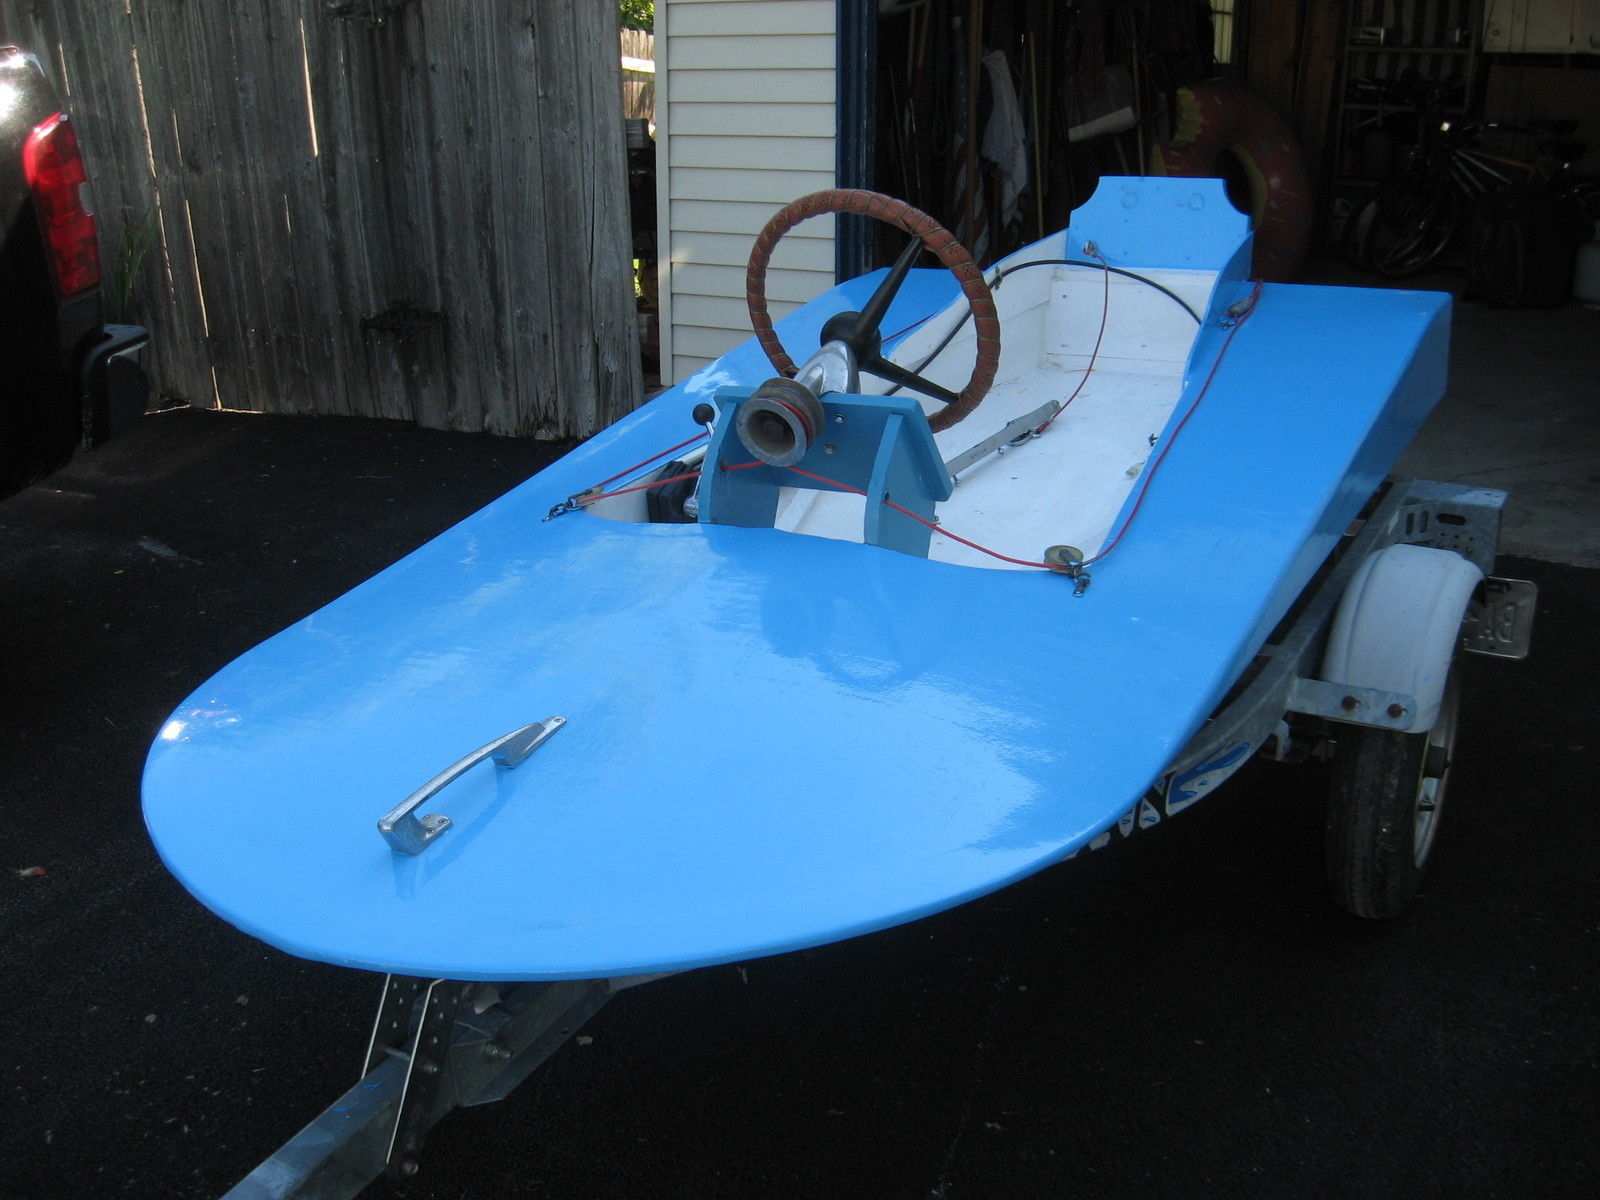 Home Built Mini Max Hydroplane 2010 for sale for $350 ..